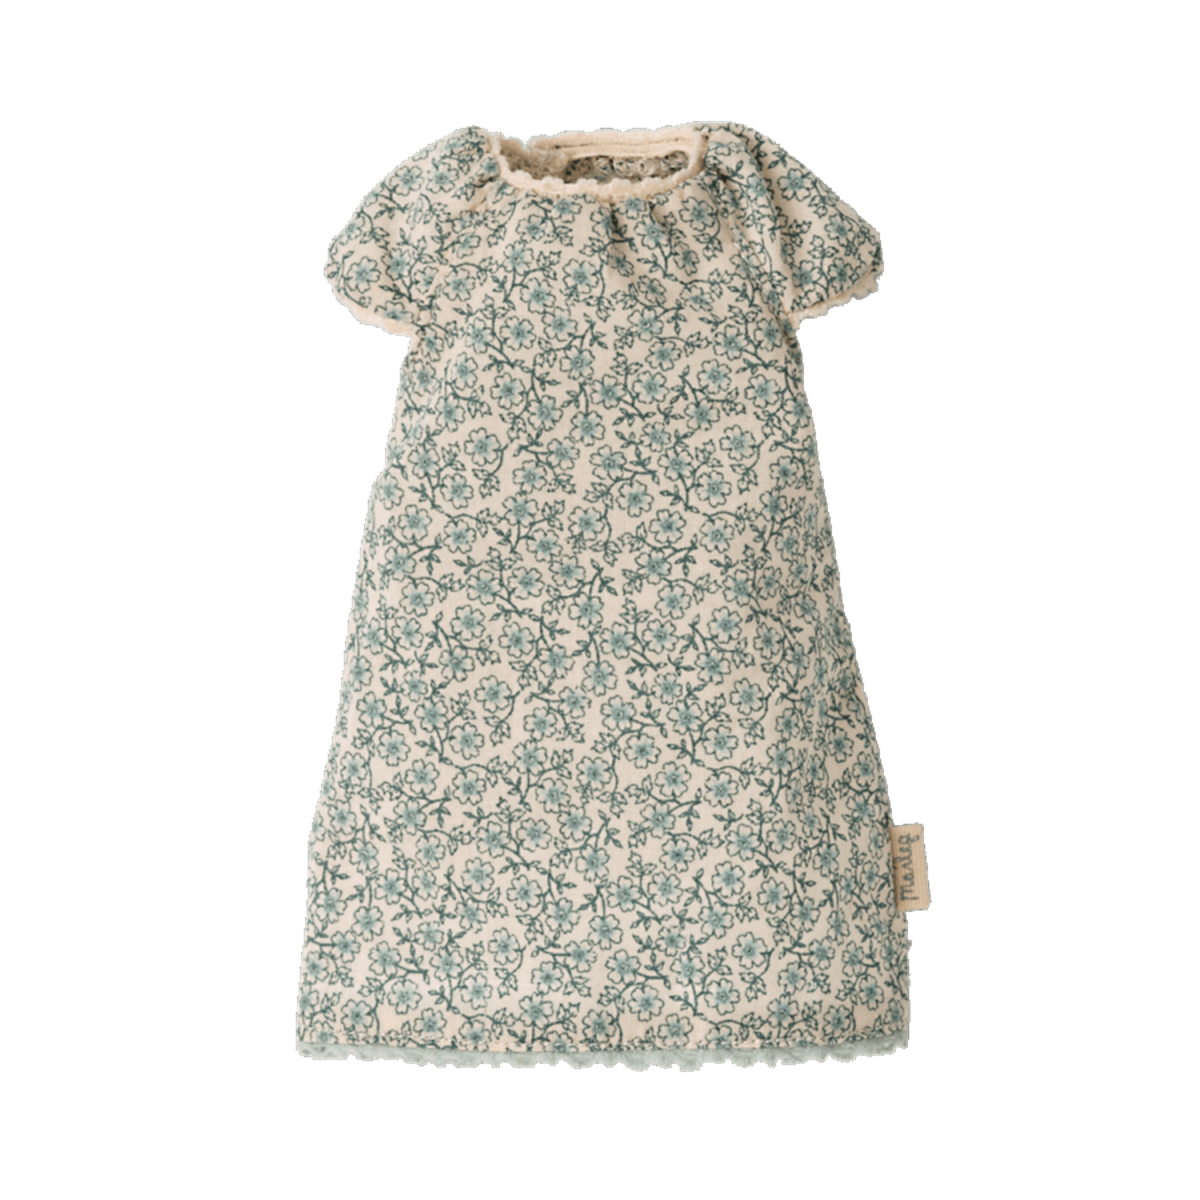 MAILEG Bunny size 2, Nightgown